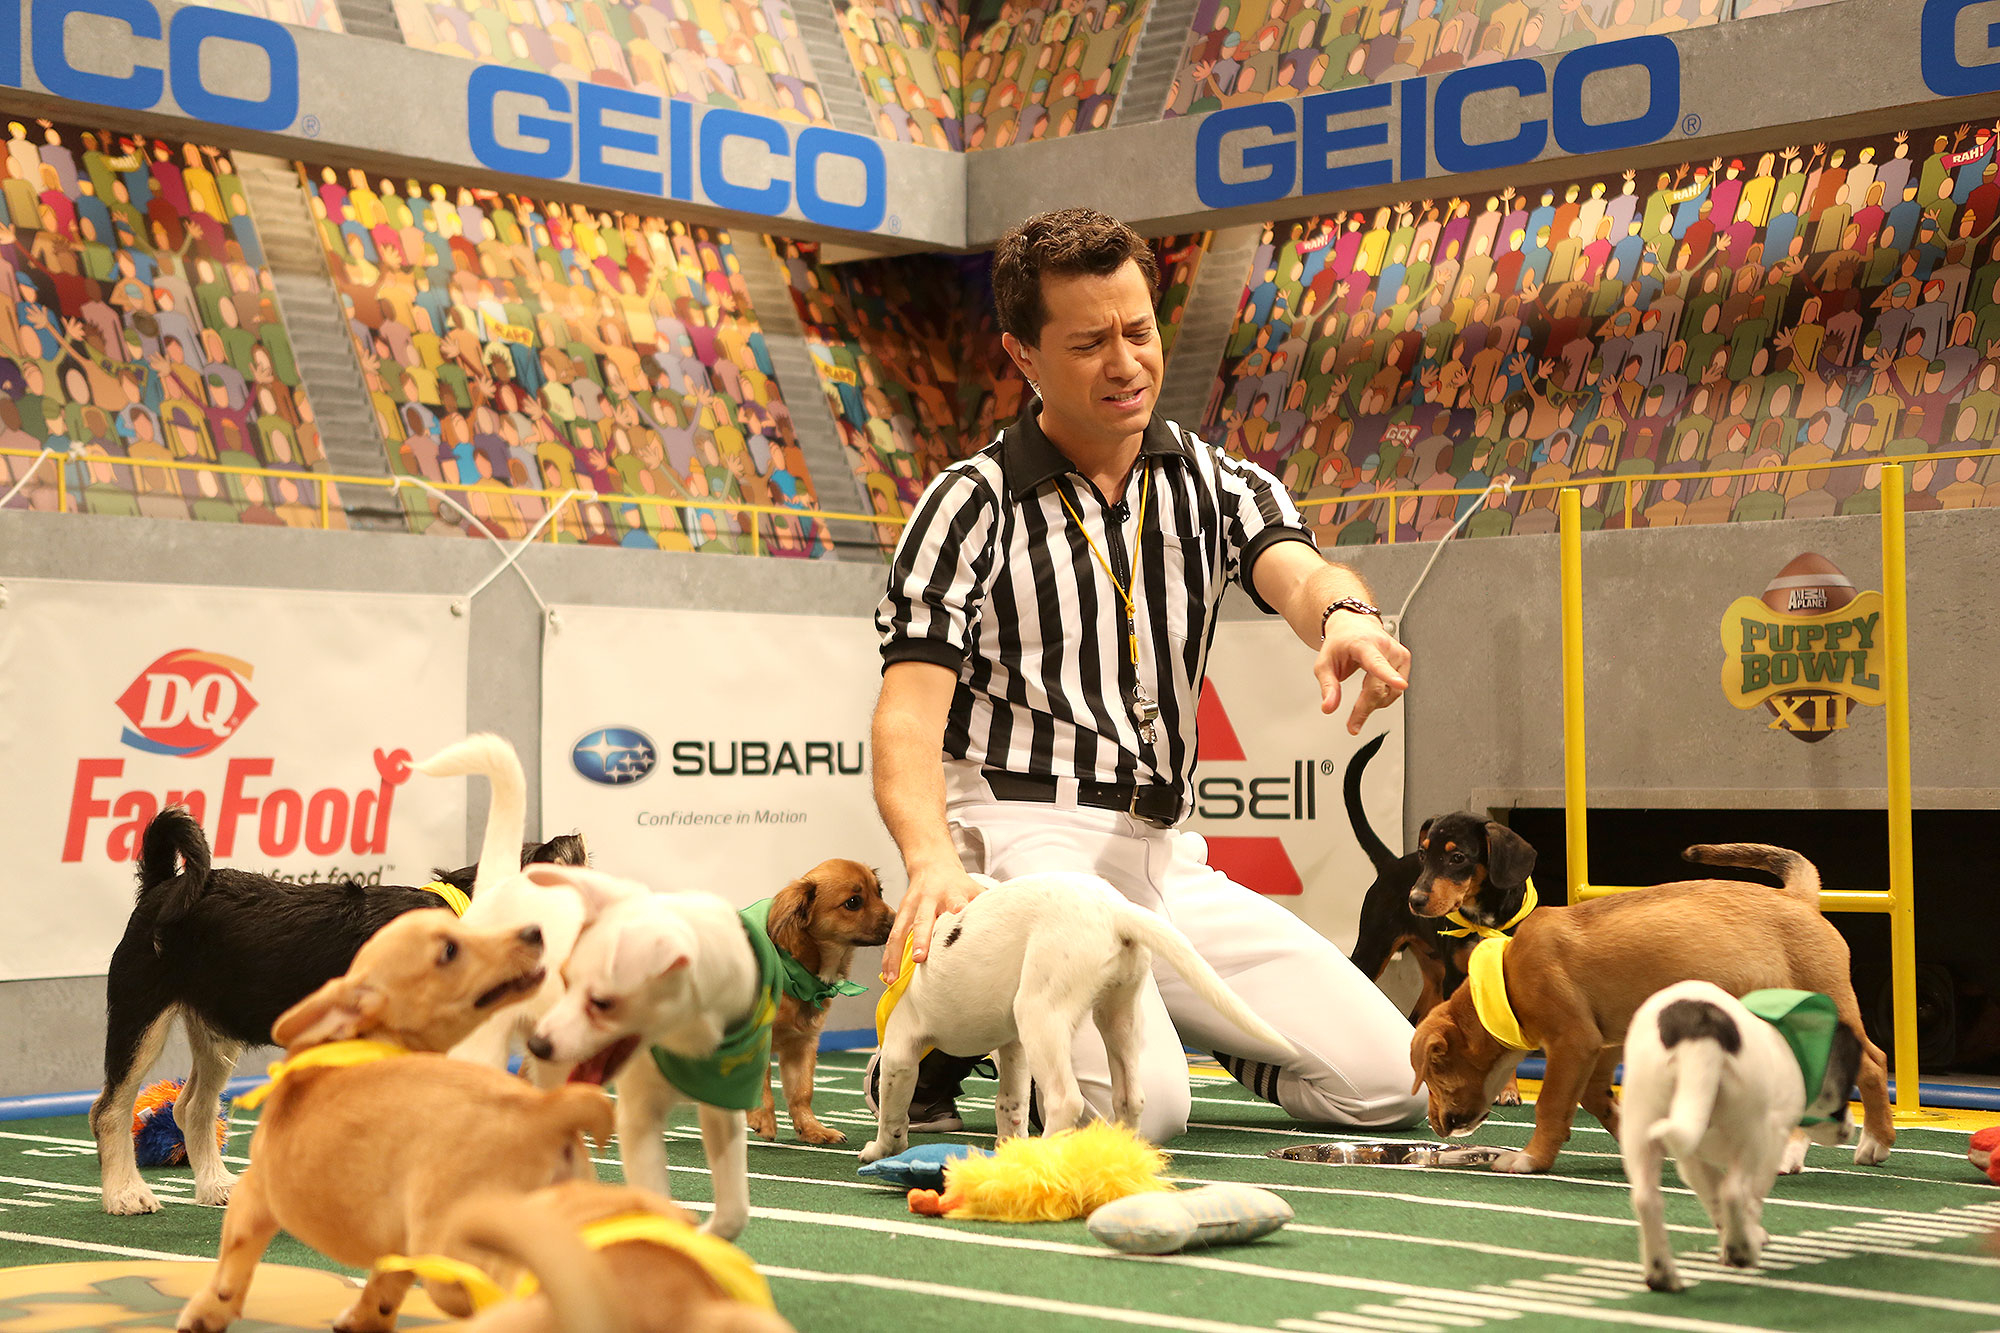 Puppy Bowl 2016 Brings Ruff Touchdowns, Sloppy Kisses and Yellow Flags: Watch!2000 x 1333